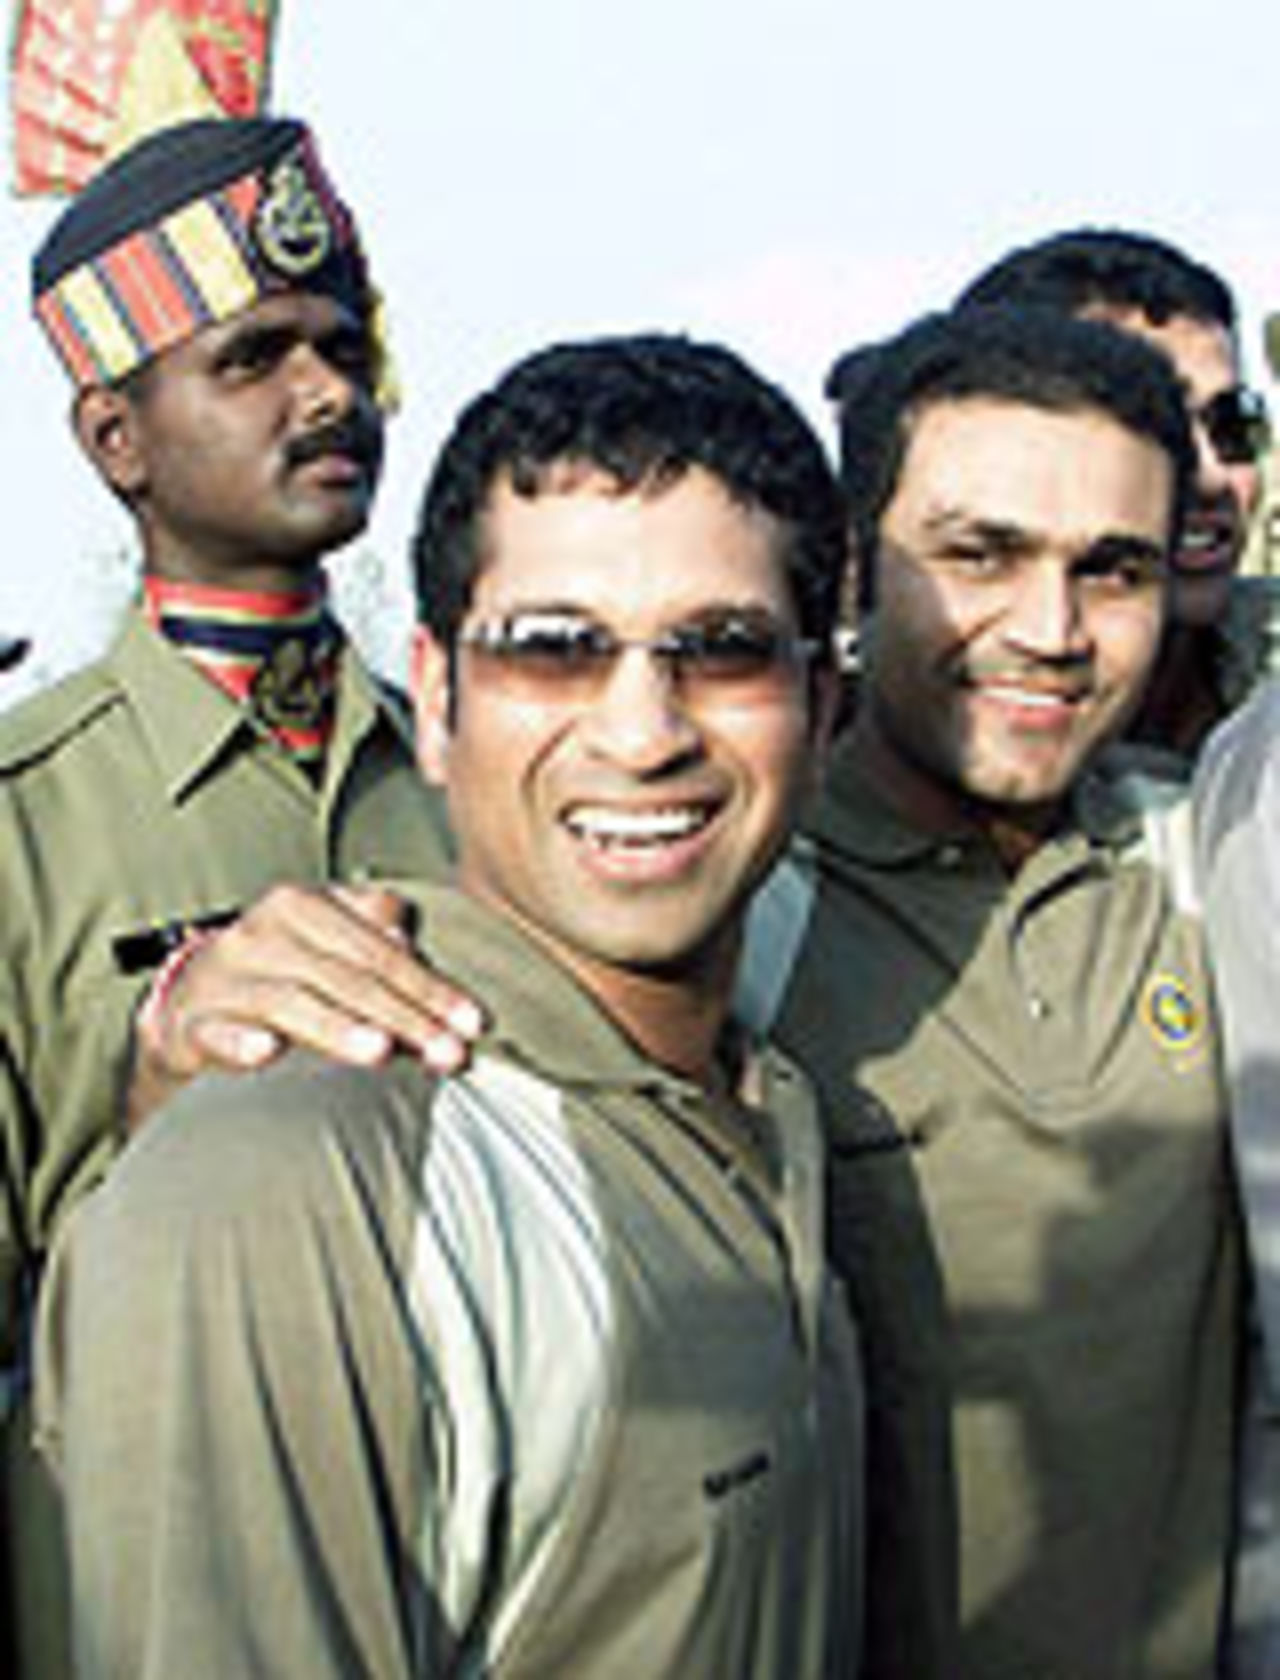 Sachin Tendulkar and Virender Sehwag at the Wagah border, watching the ceremonial change of guard, a couple of days before the second Test against Pakistan at Lahore, April 2, 2004